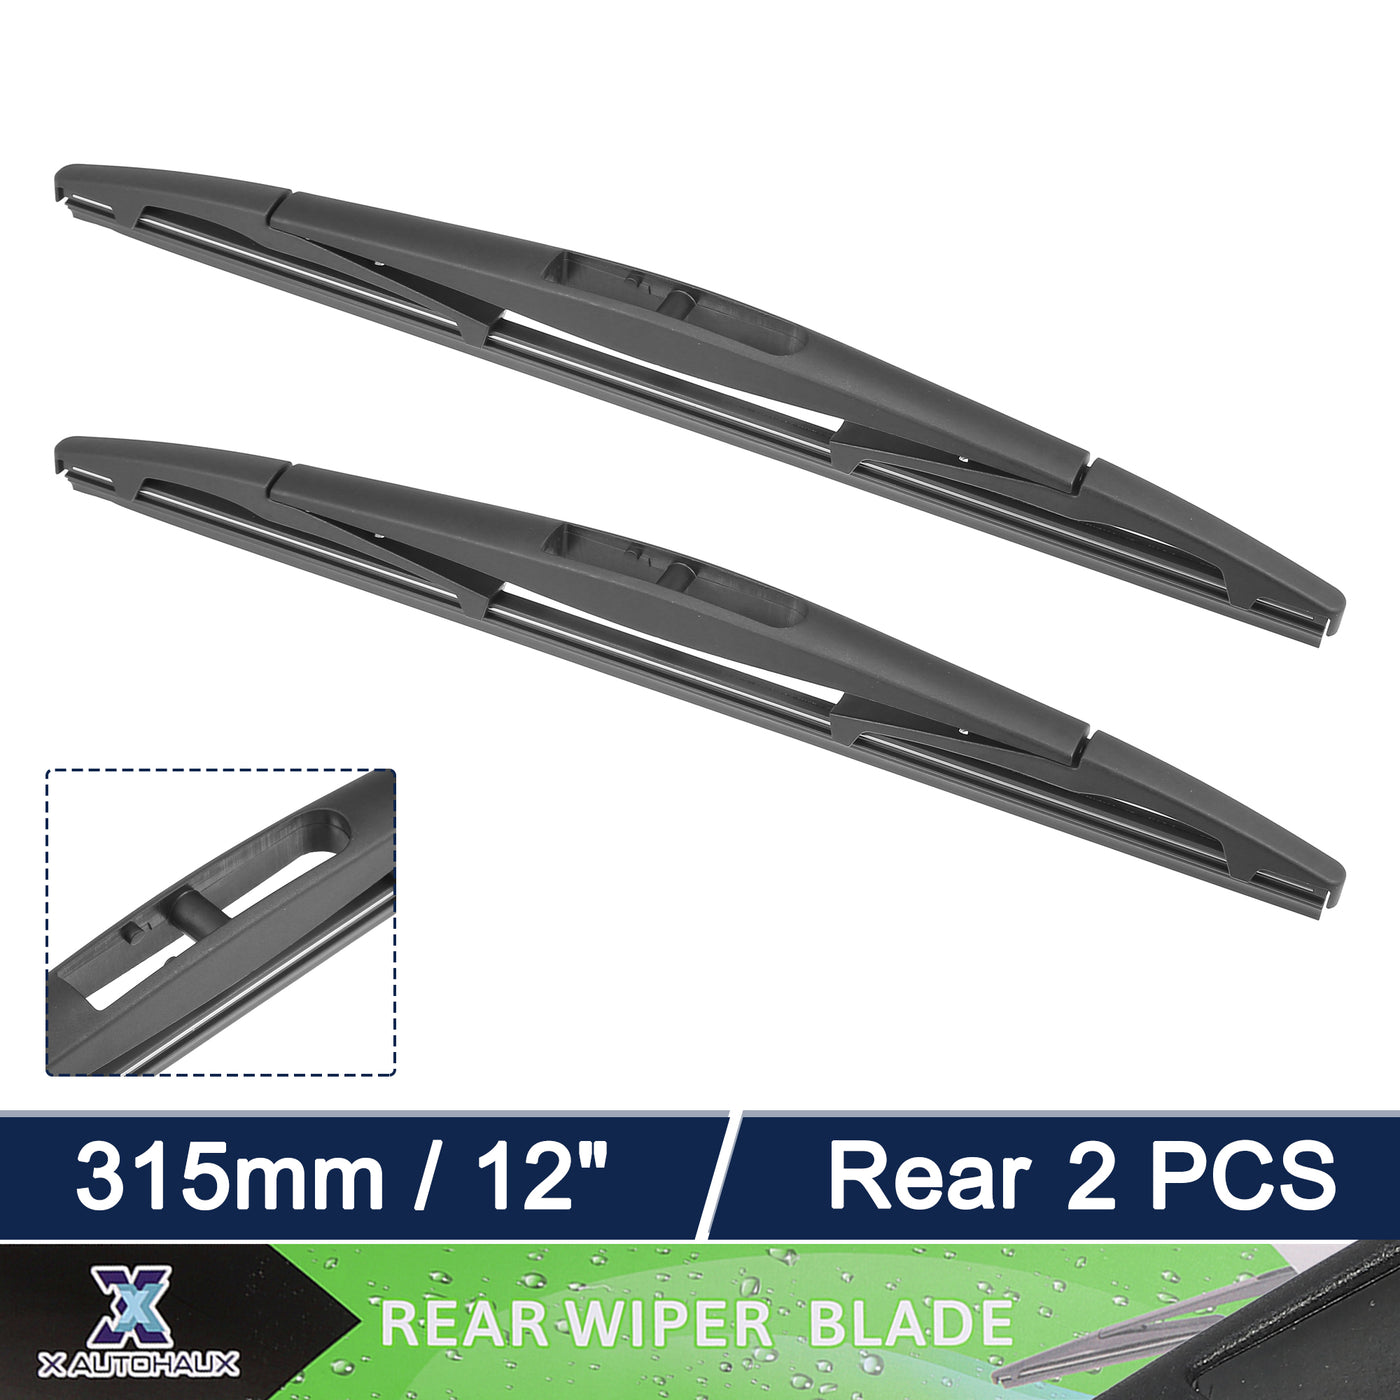 X AUTOHAUX 2pcs Rear Windshield Wiper Blade Replacement for Honda CR-V 2017-2022 for Nissan Pathfinder 2006-2012 for Mitsubishi Outlander 2007-2020